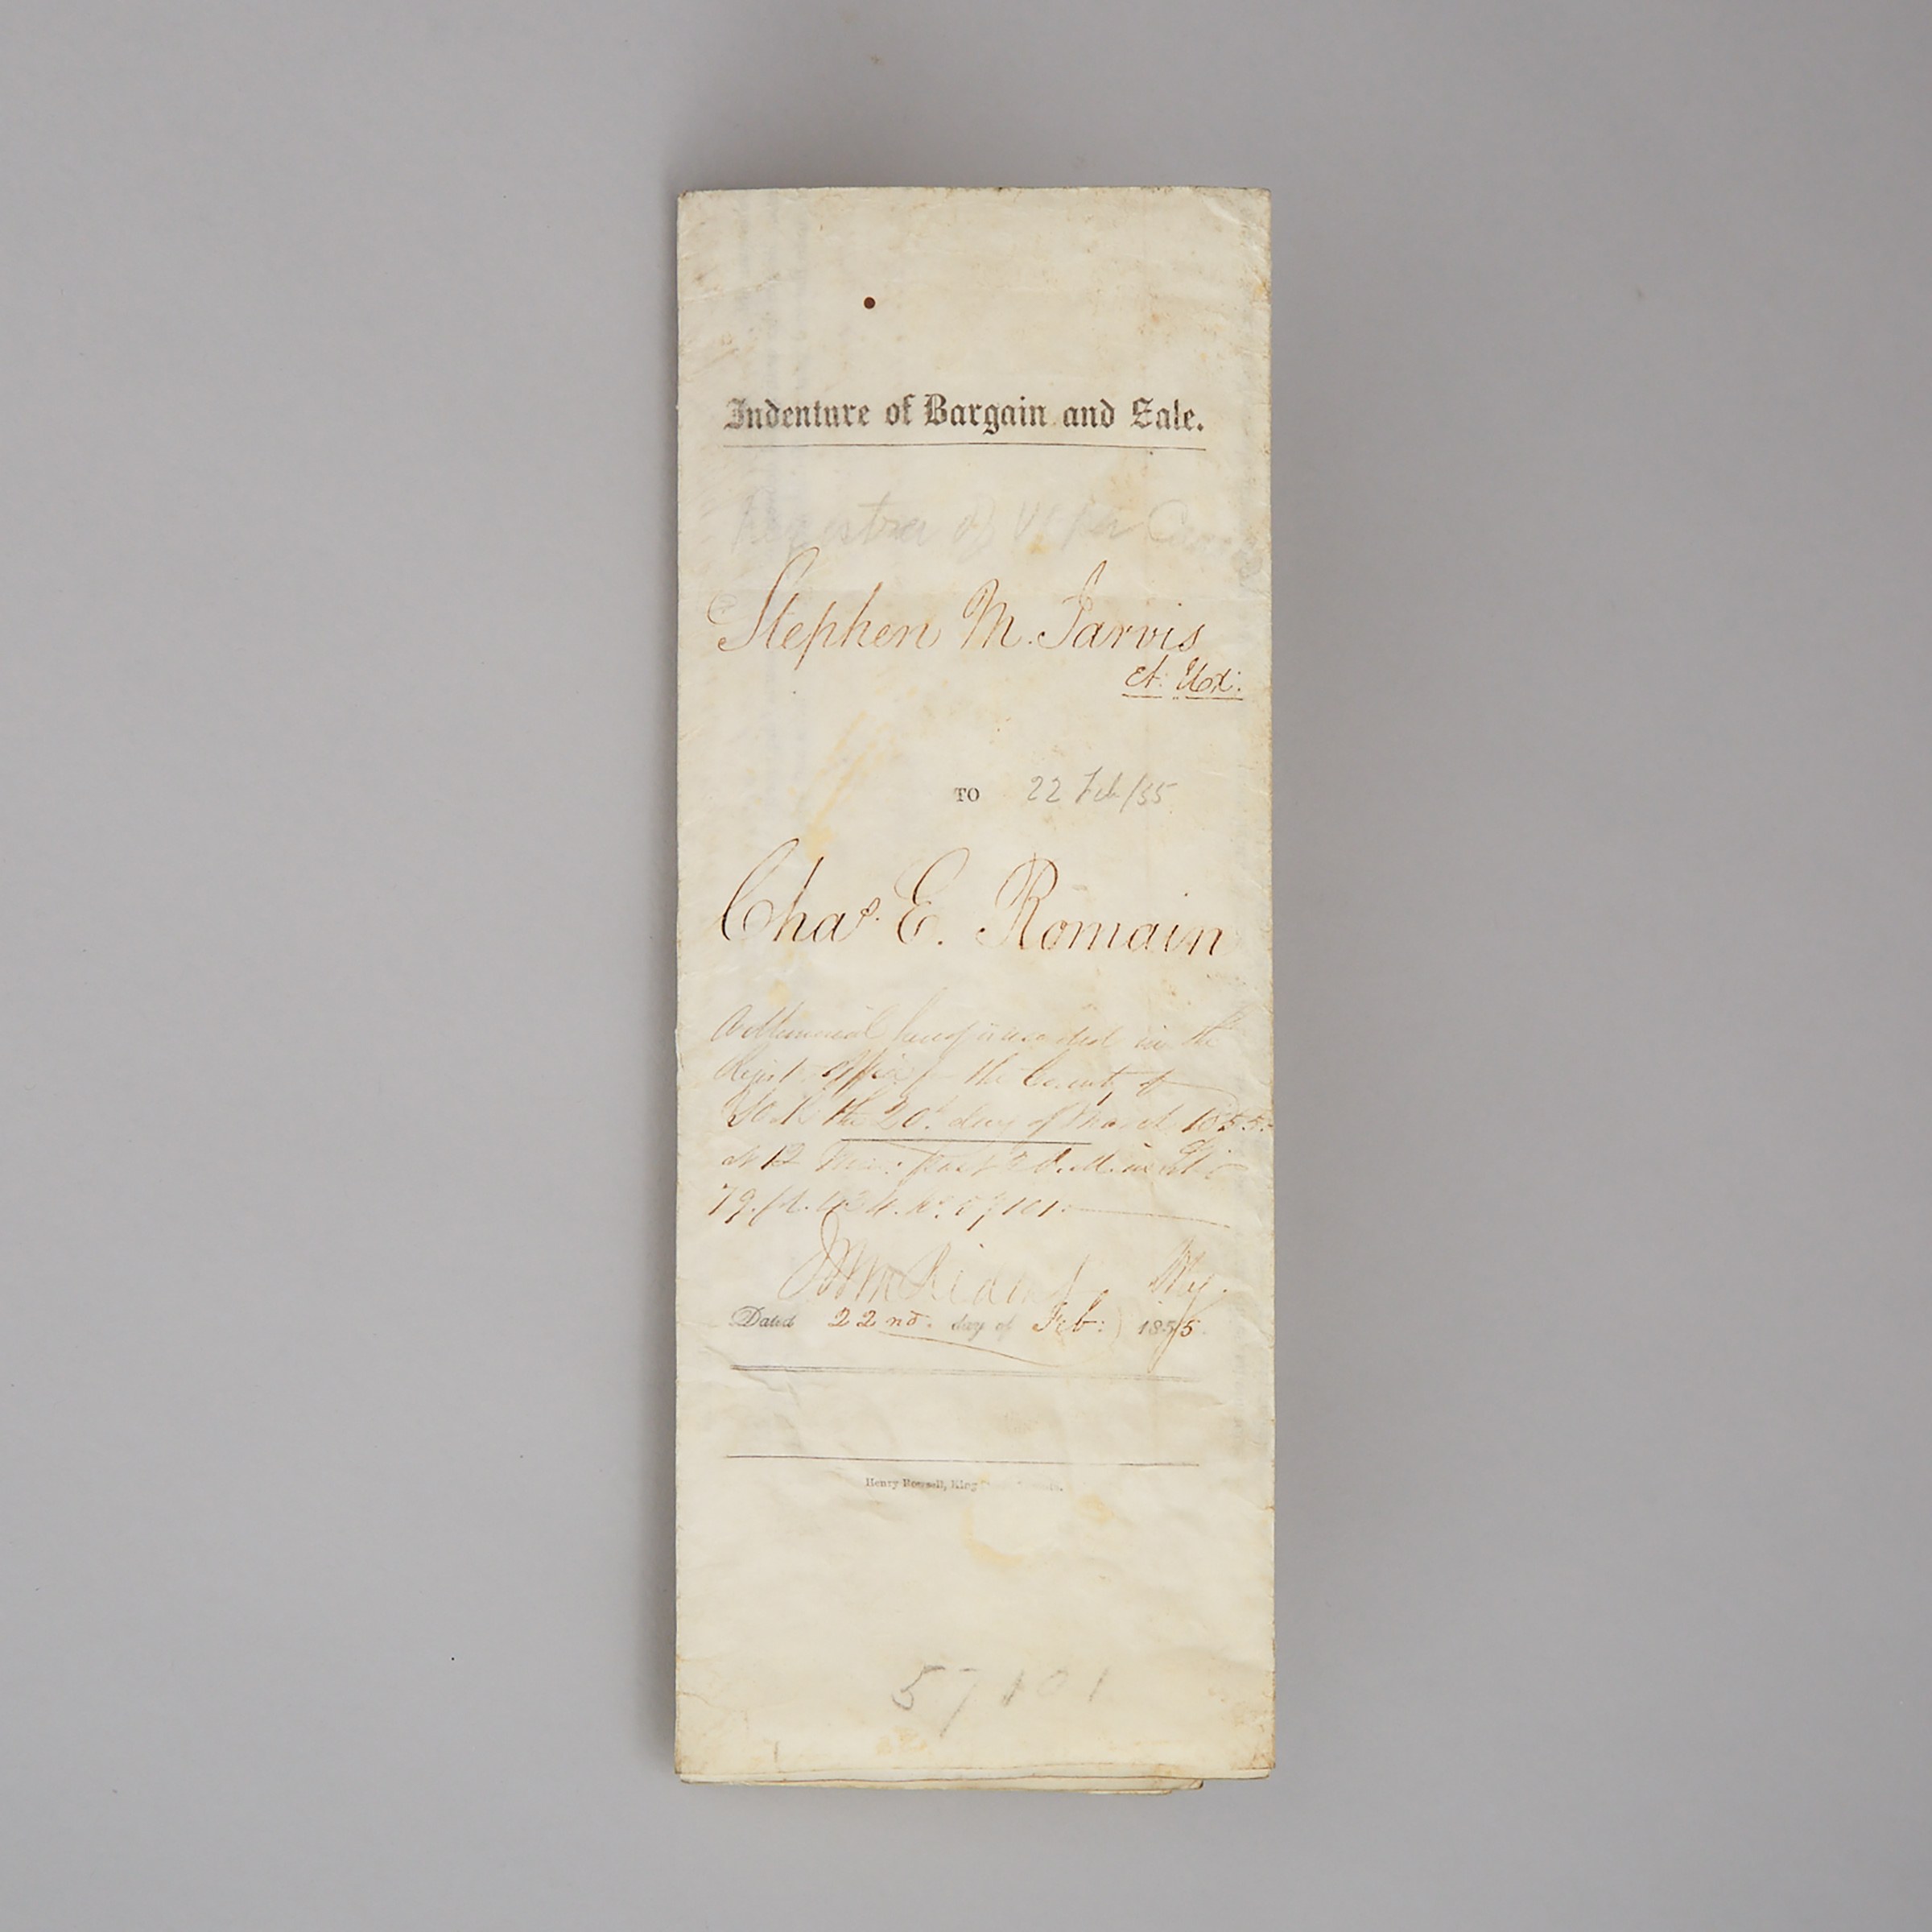 Indenture of Toronto Land Sale from Stephen Maule and Mary Jarvis to Charles Edward Romain, February 22nd, 1855